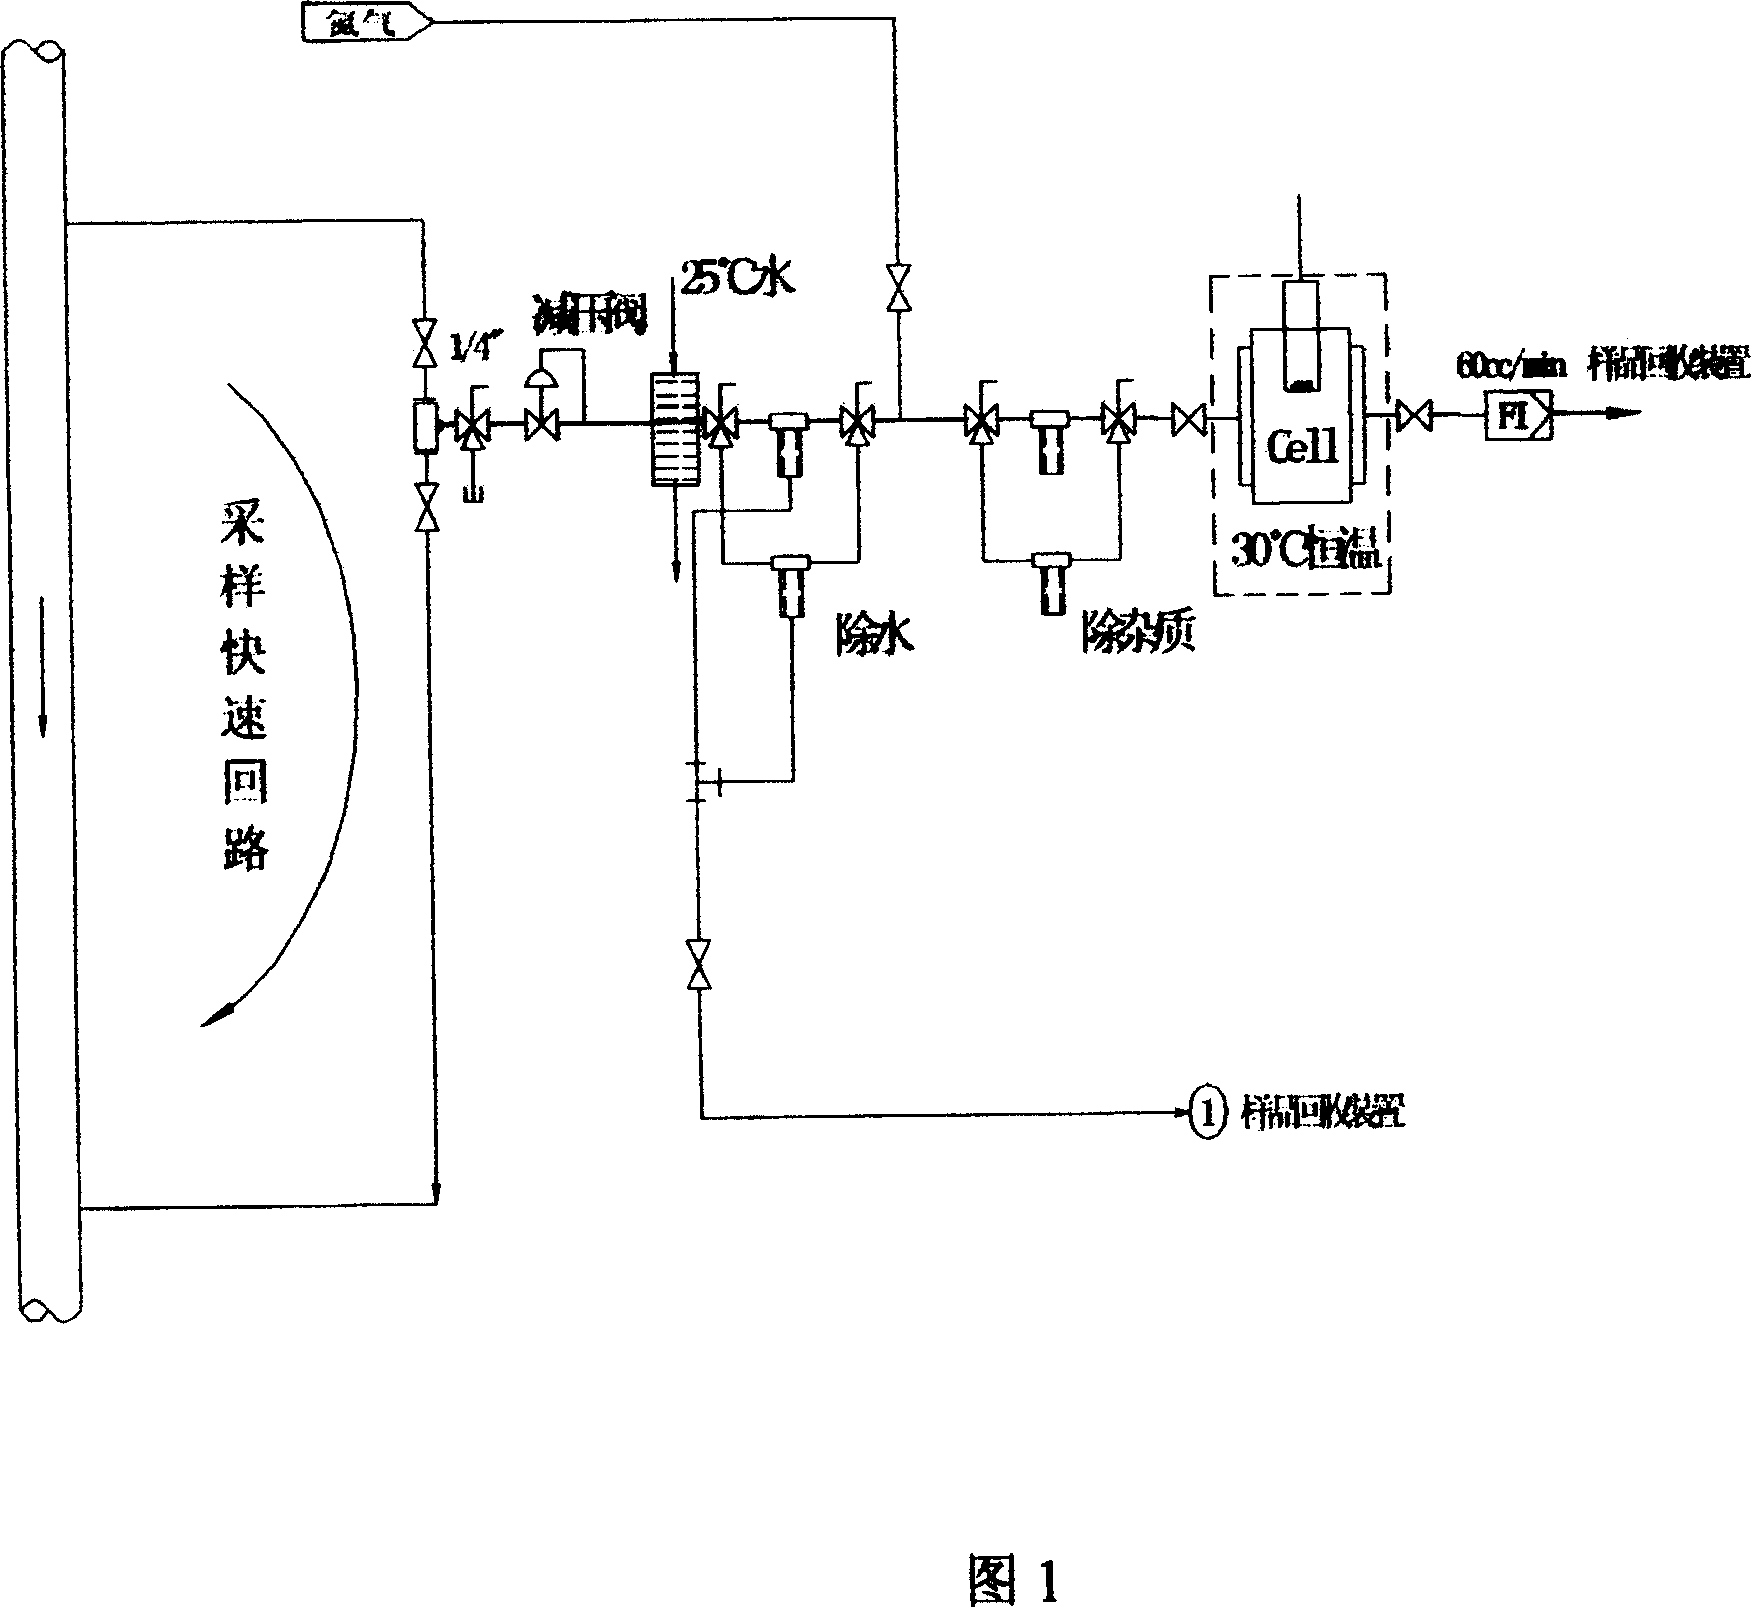 Online optimized method for blending oil products, and system of implementing the method